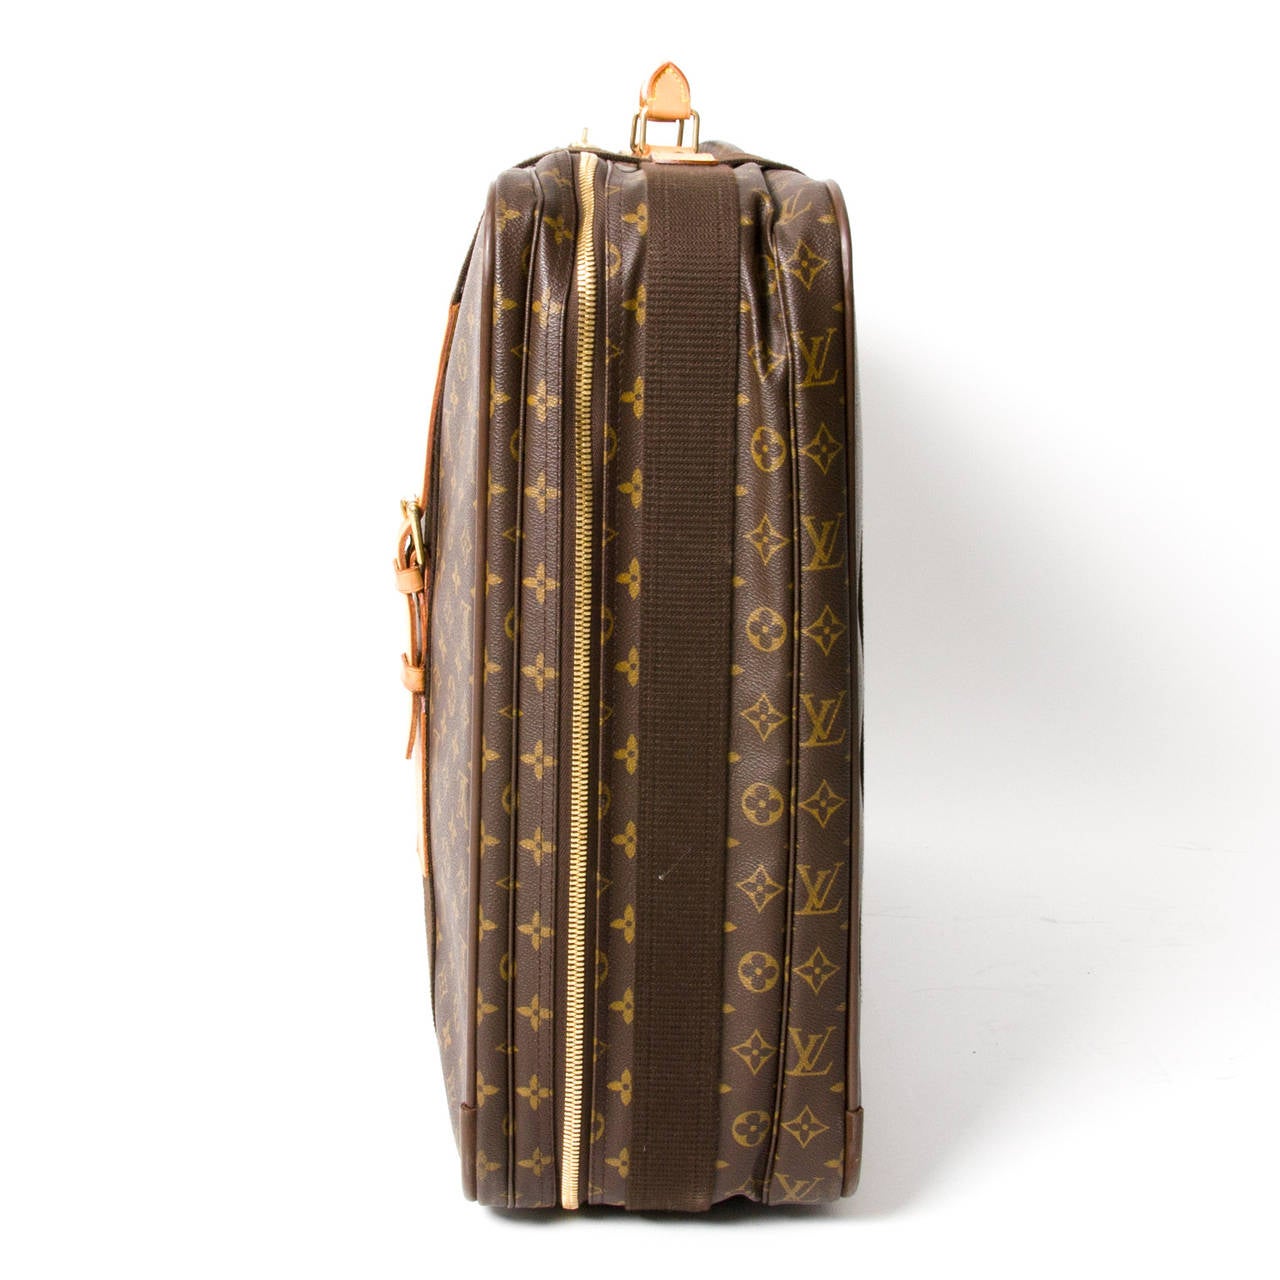 Travel in style with the brown and tan monogram 'Satellite 70' suitcase with zip closure and top handle.
Two straps with buckles on the front. One interior wall pocket and ID holder.